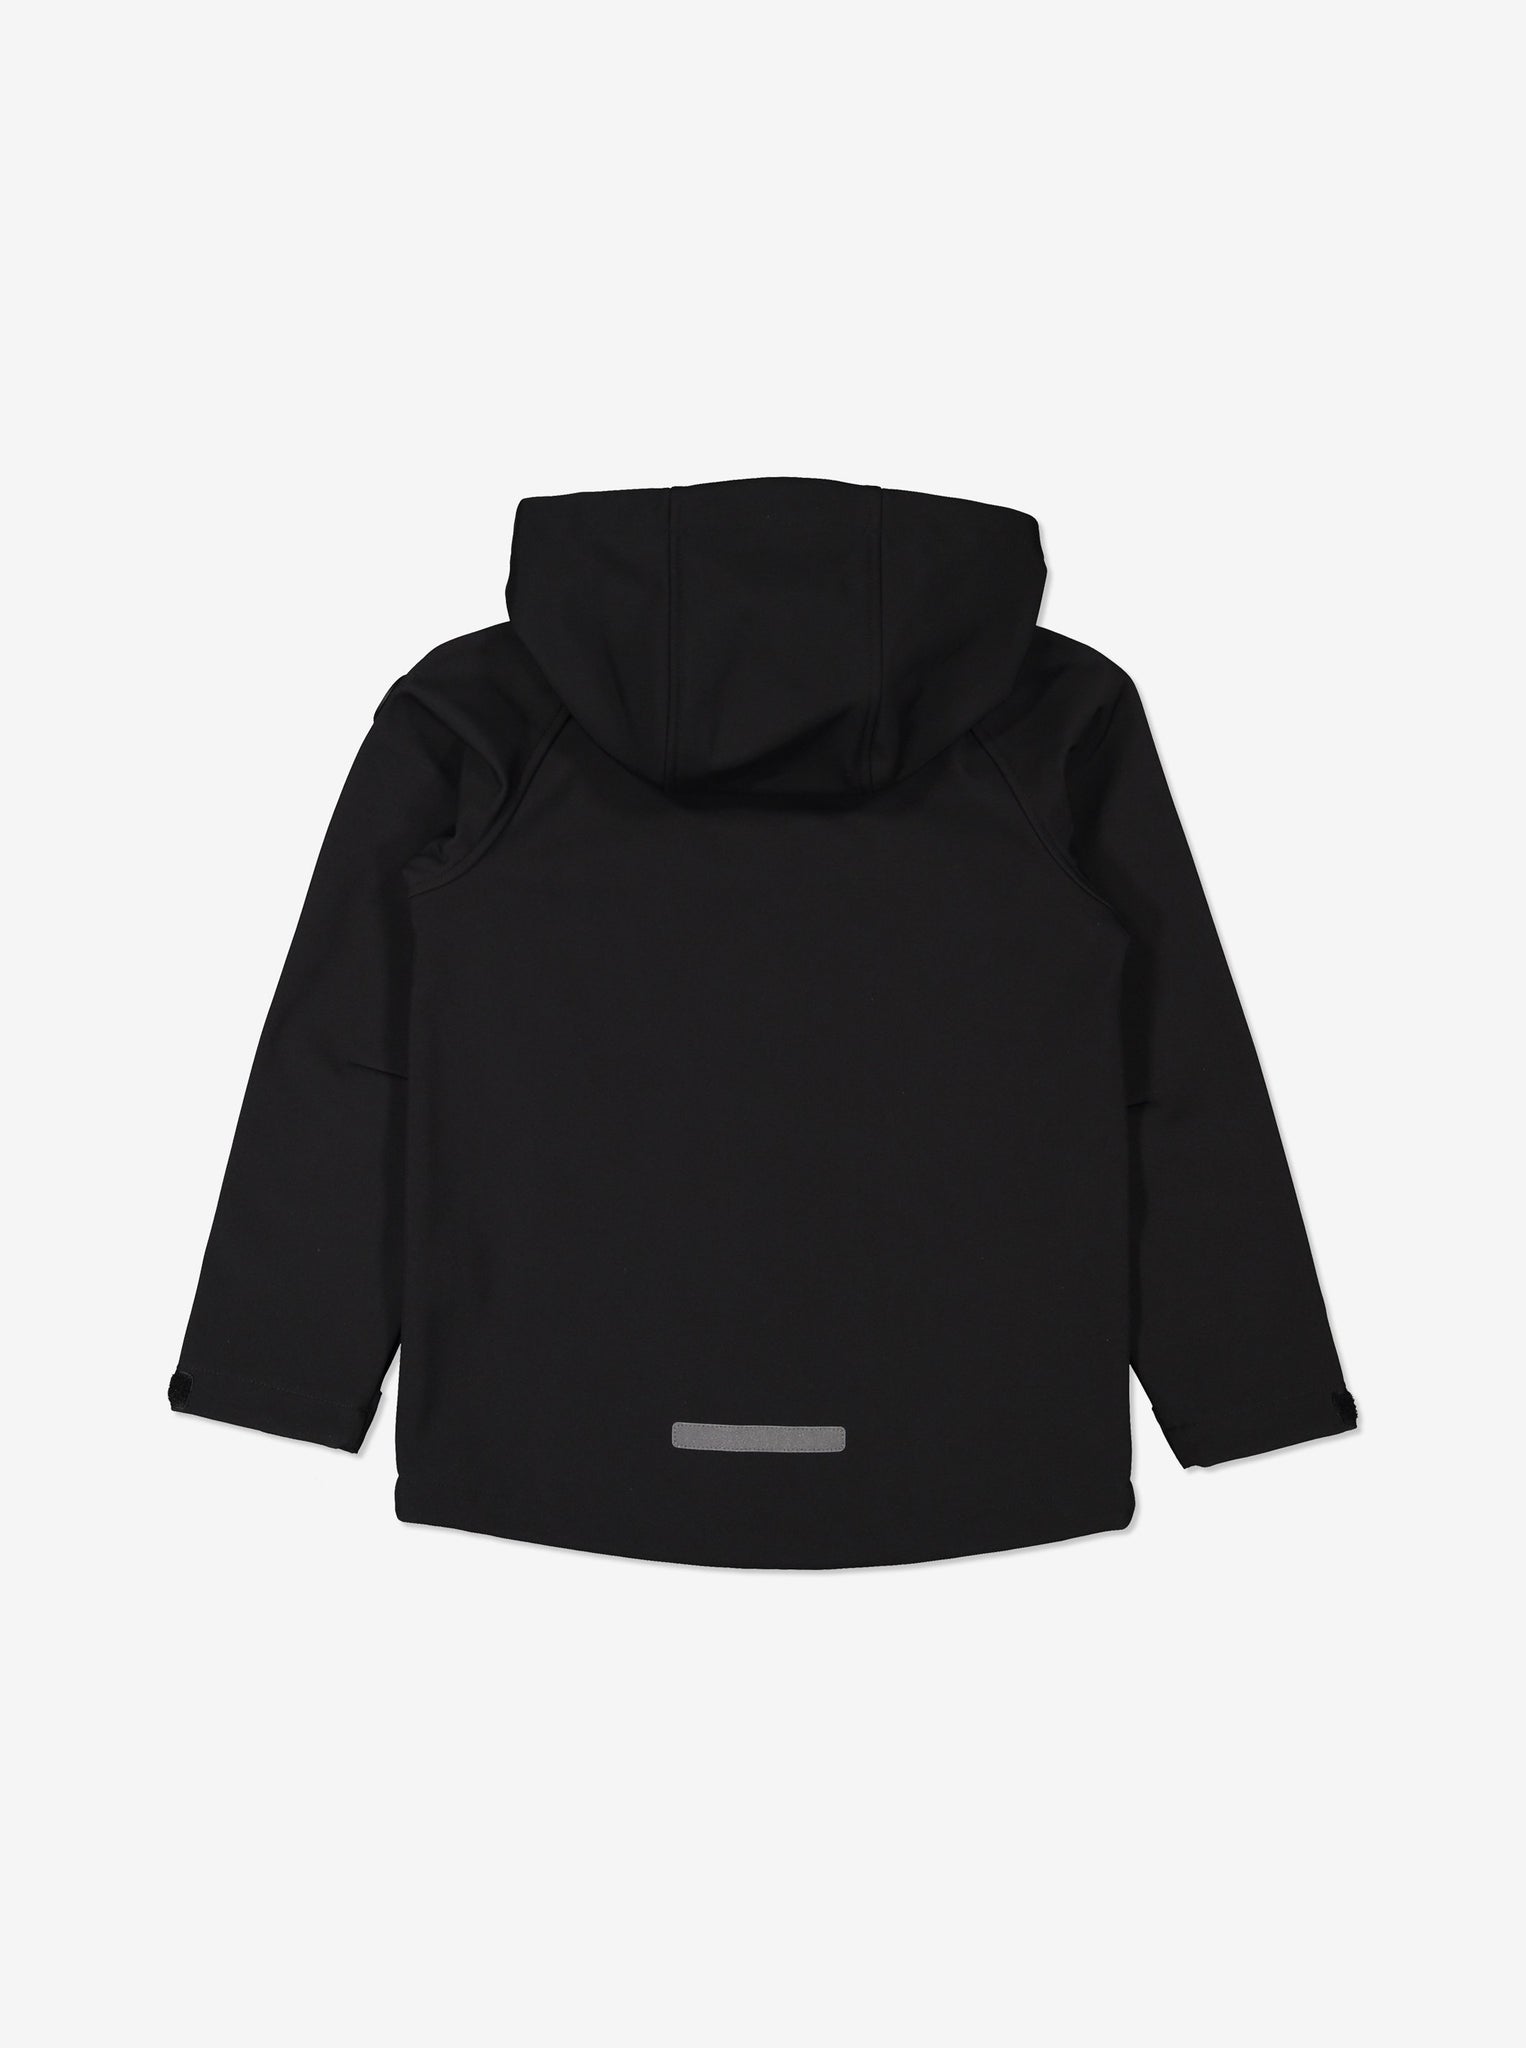  Black Stretch Waterproofs Kids Jacket black, soft warm and comfortable, ethical kids clothes polarn o. pyret 